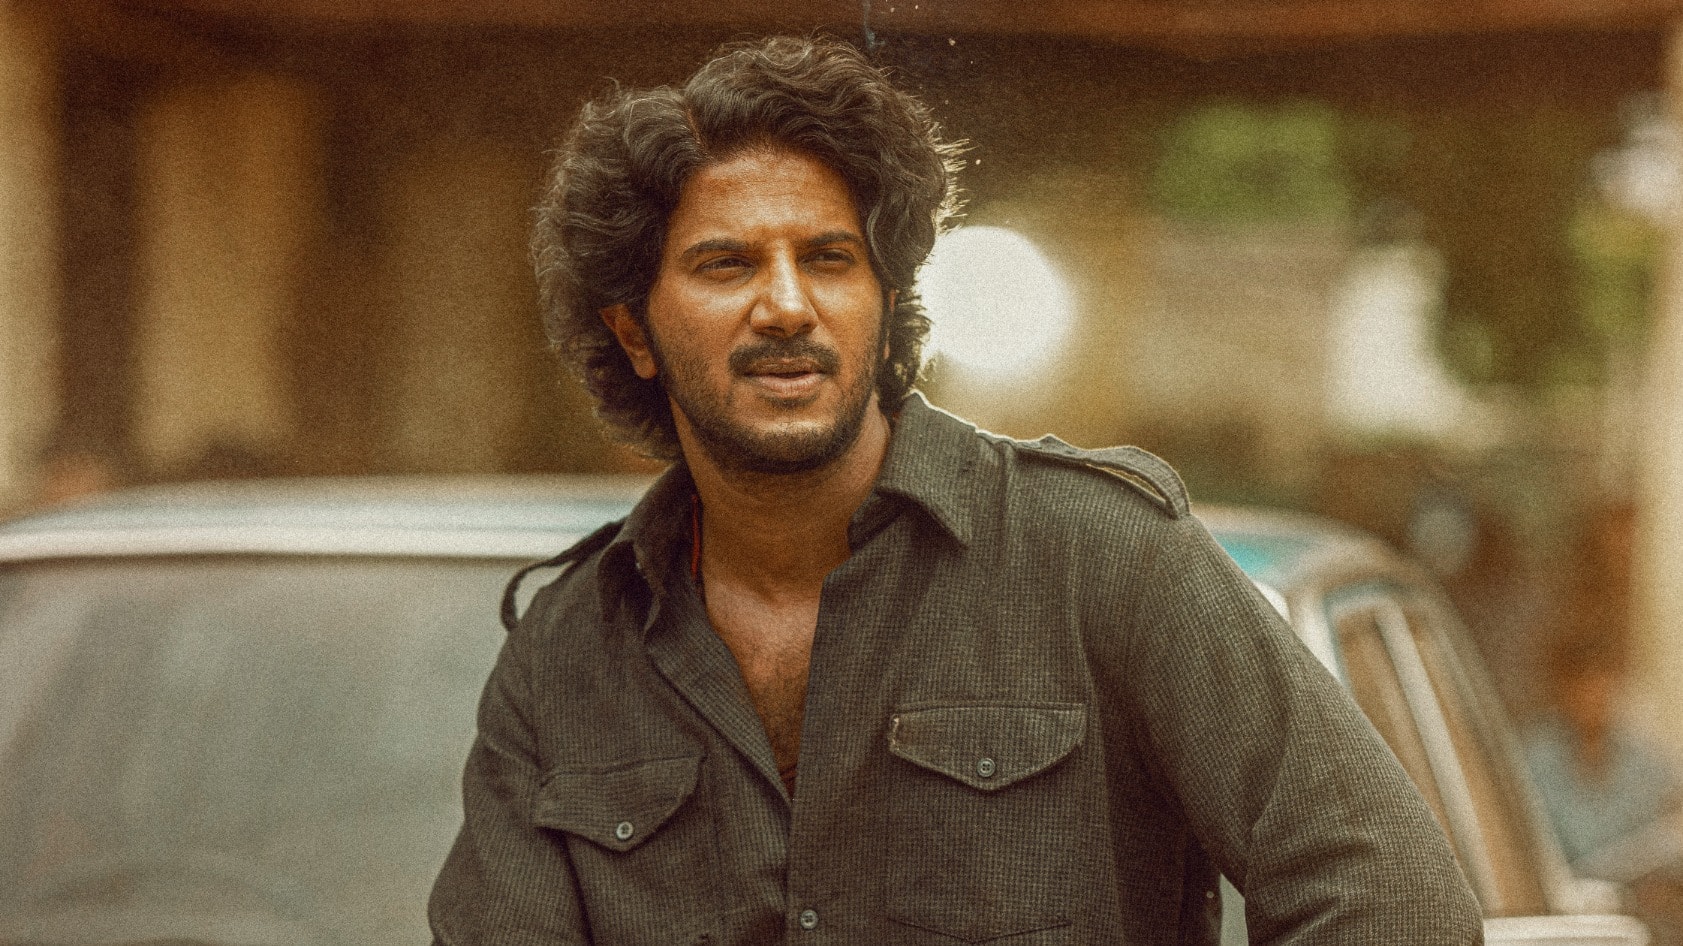 https://www.mobilemasala.com/movies/King-of-Kotha-plot-revealed-Dulquer-Salmaans-revenge-drama-to-have-a-non-linear-narrative-i162089